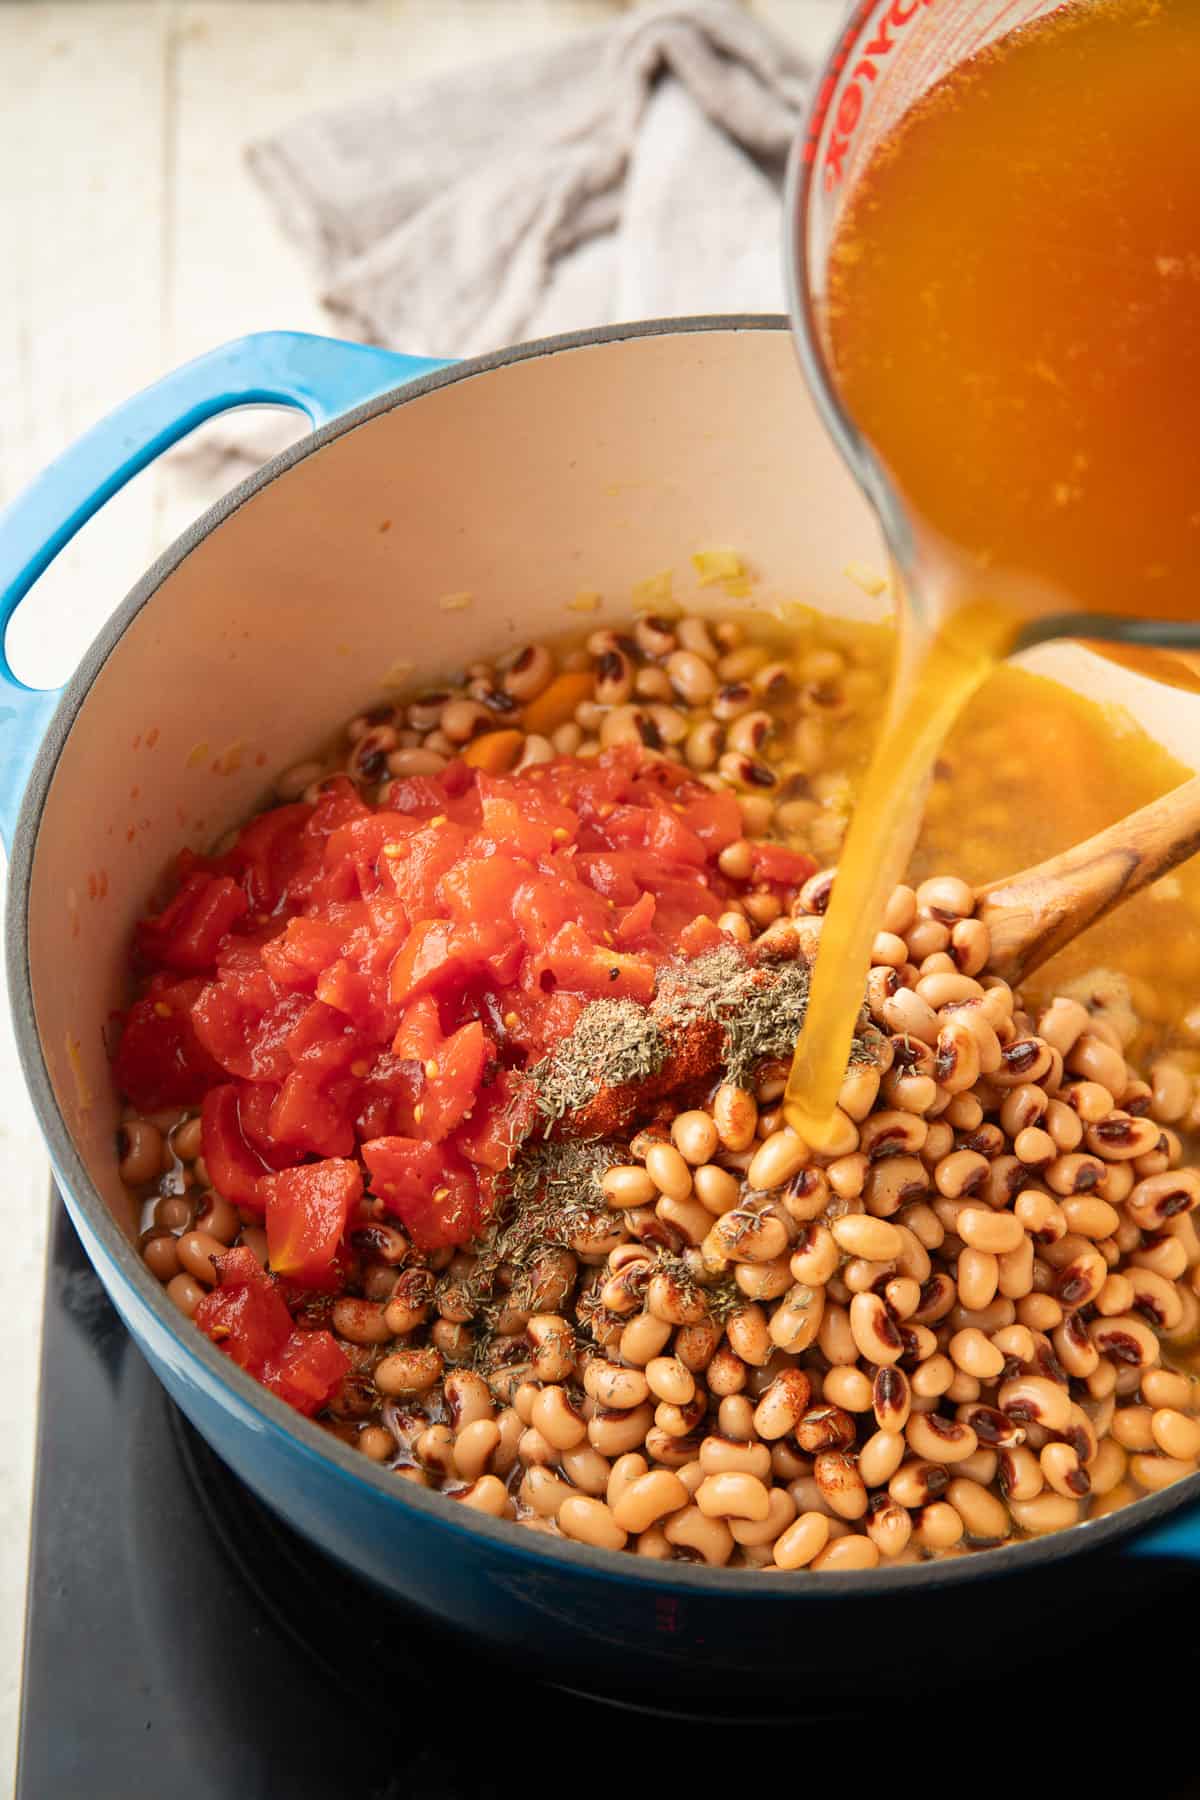 Broth being poured into a pot of black-eyed peas, tomatoes and spices.